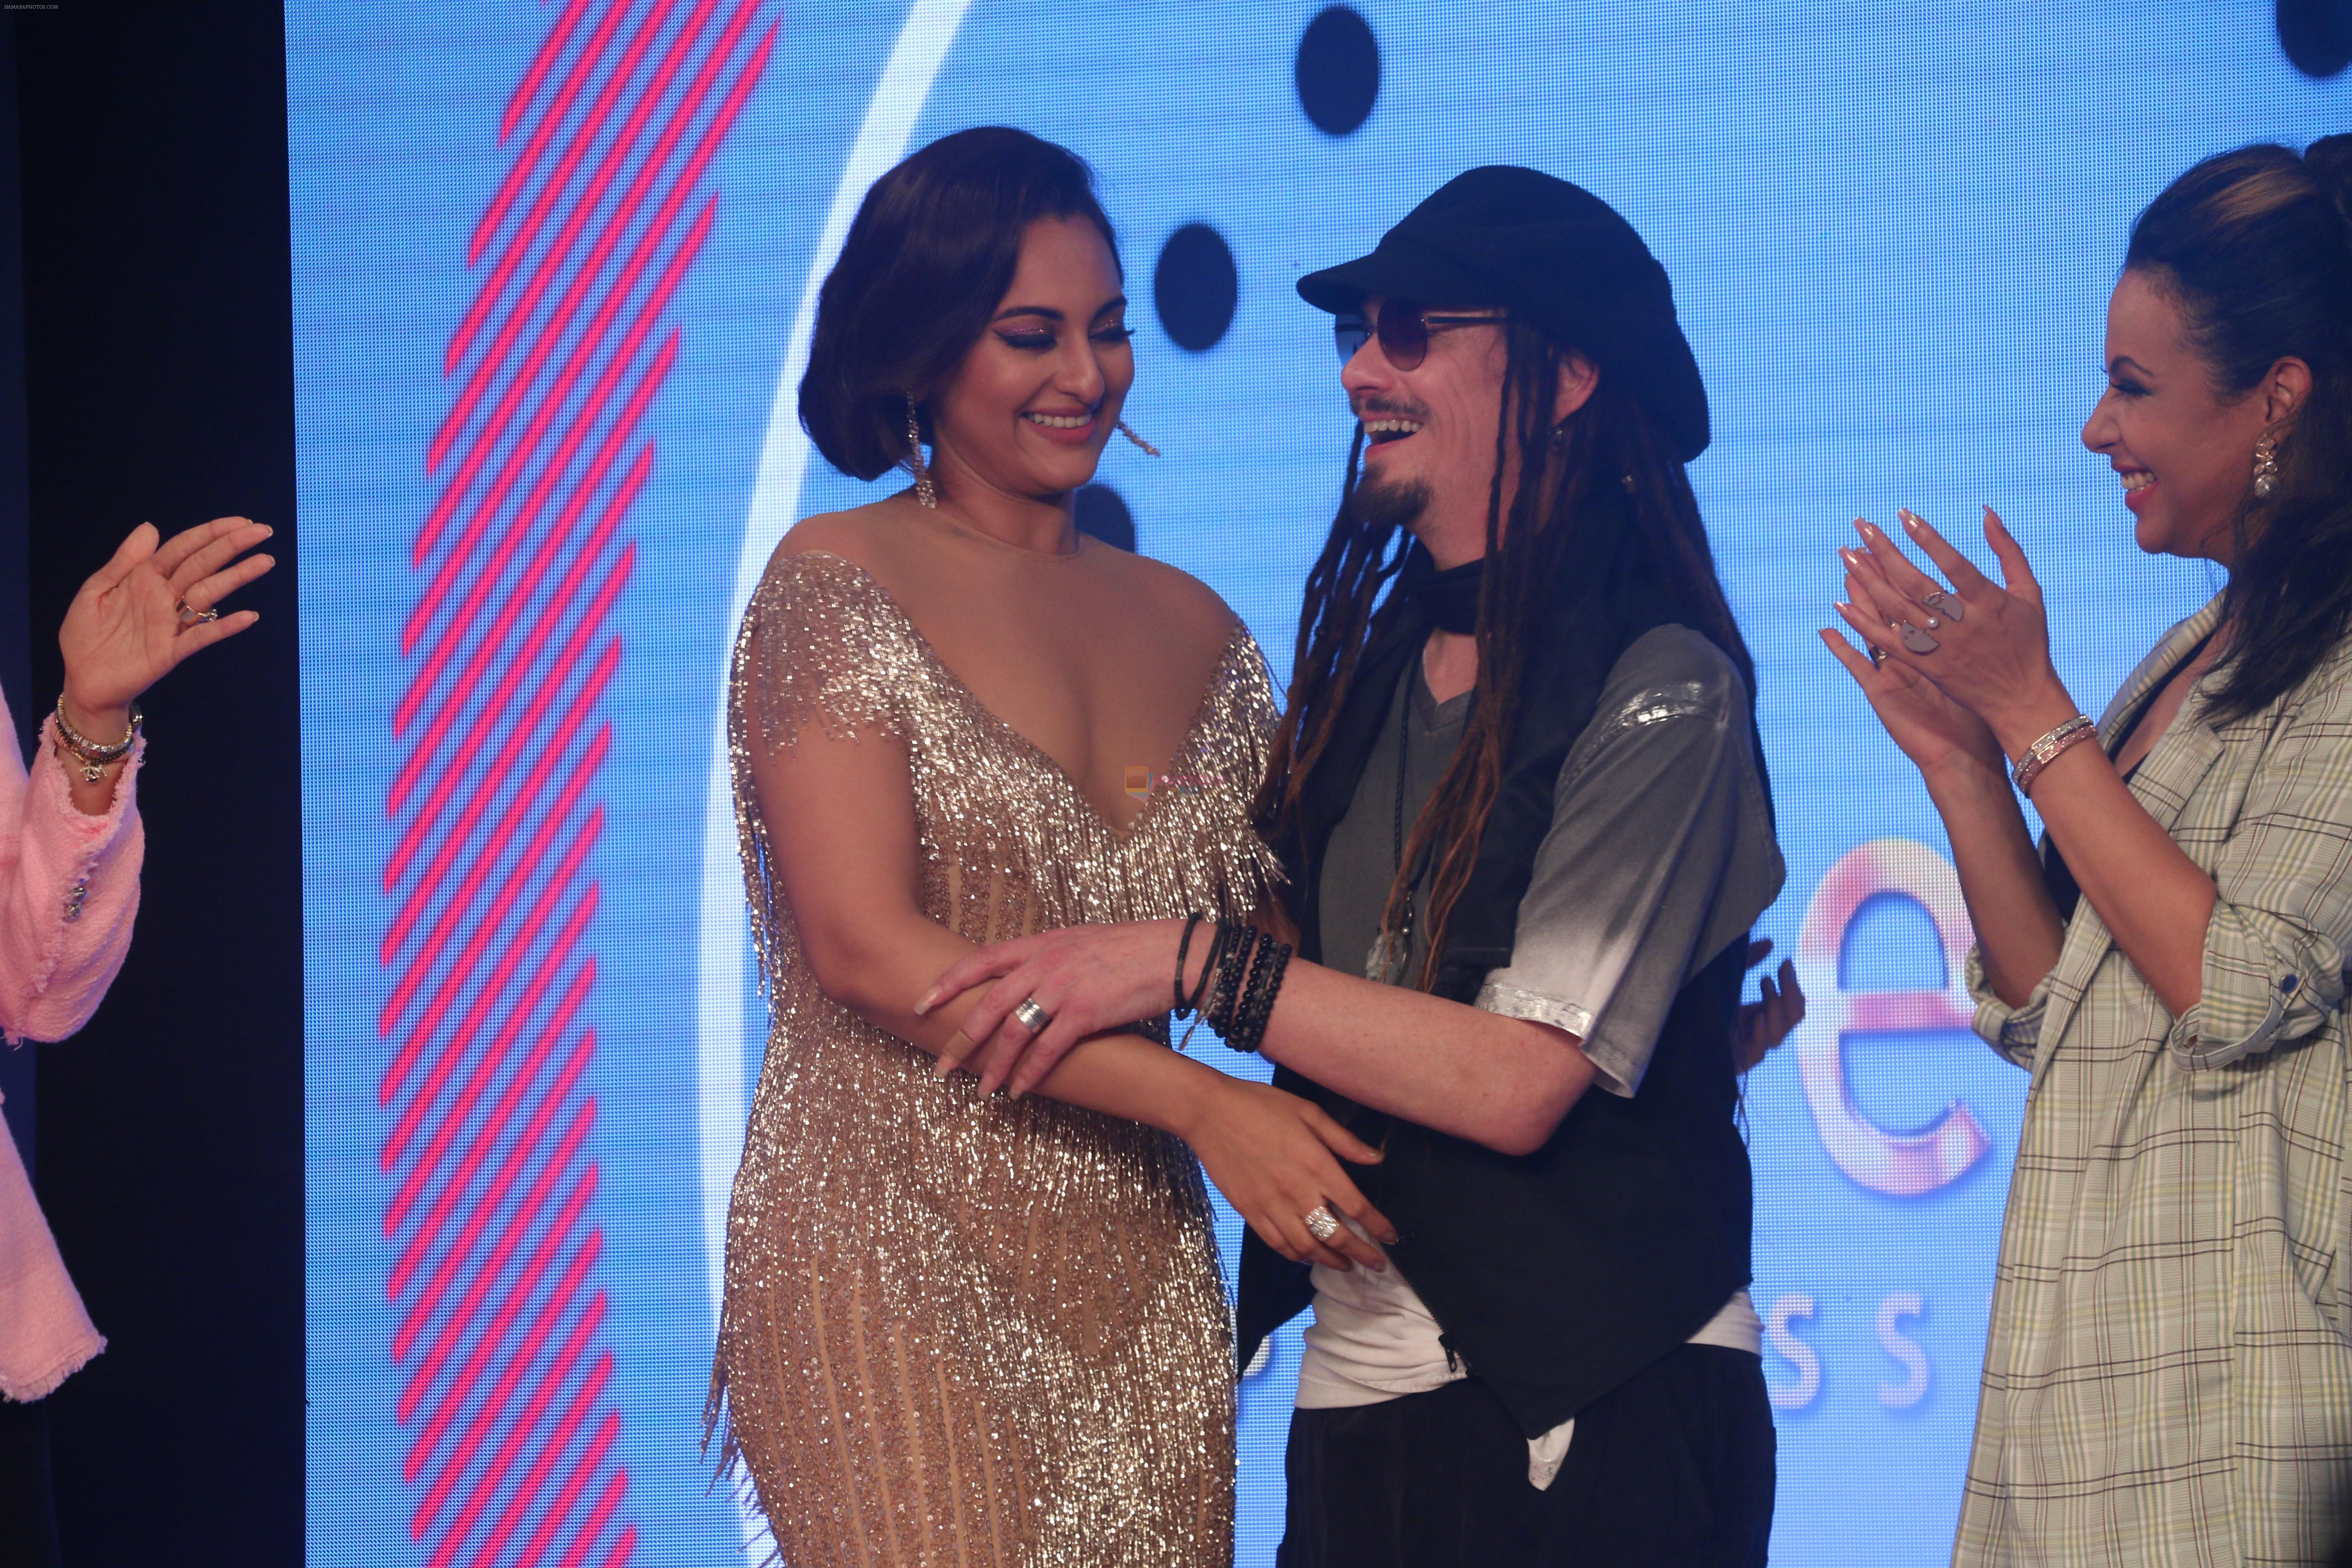 Sonakshi Sinha at the Streax Professional Retro Remix hair show in The Leela, andheri on 24th June 2019